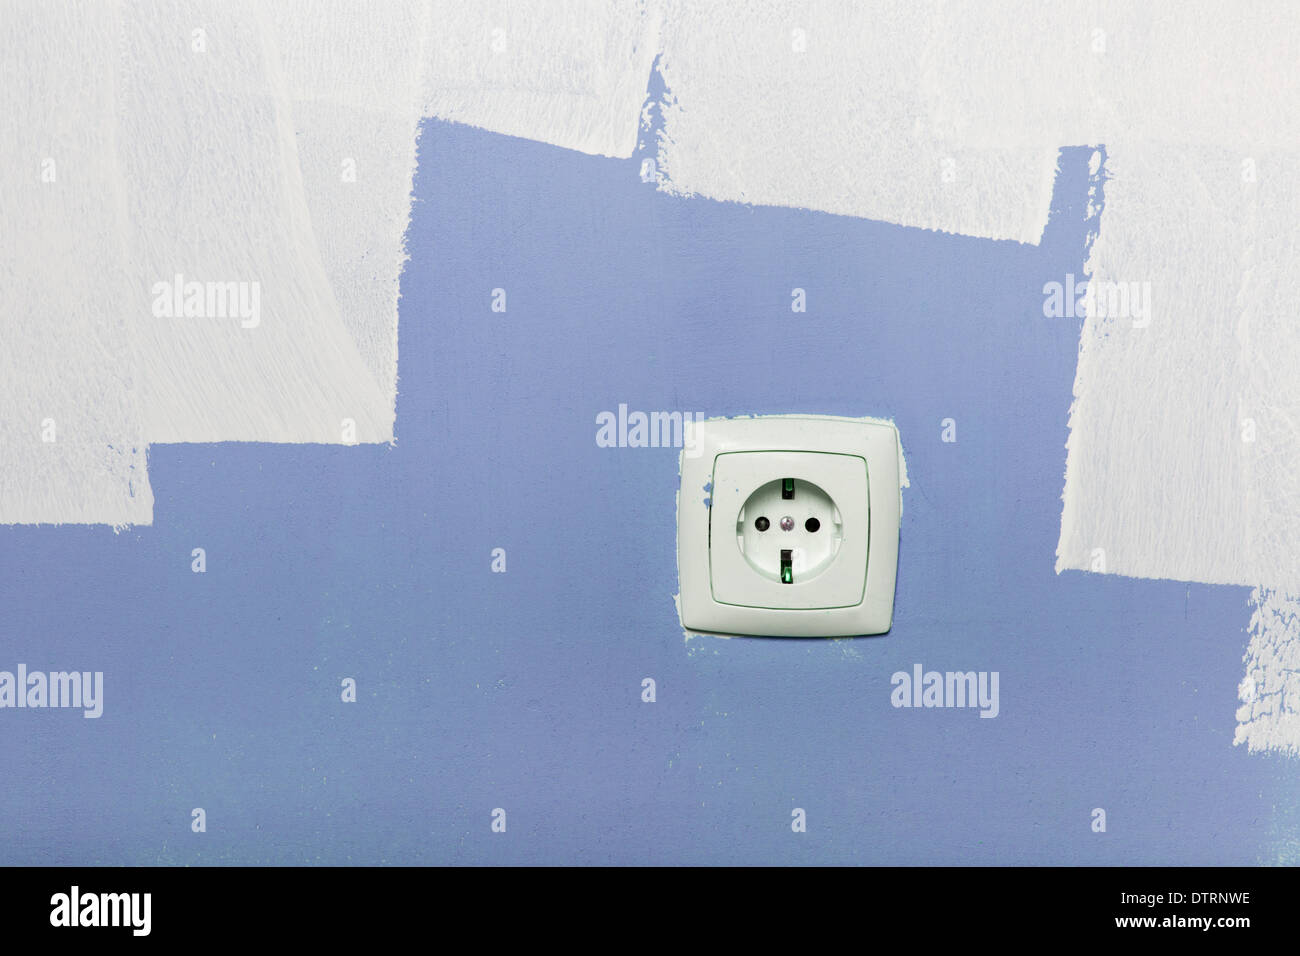 Electrical Outlet On Wall Interior DTRNWE 